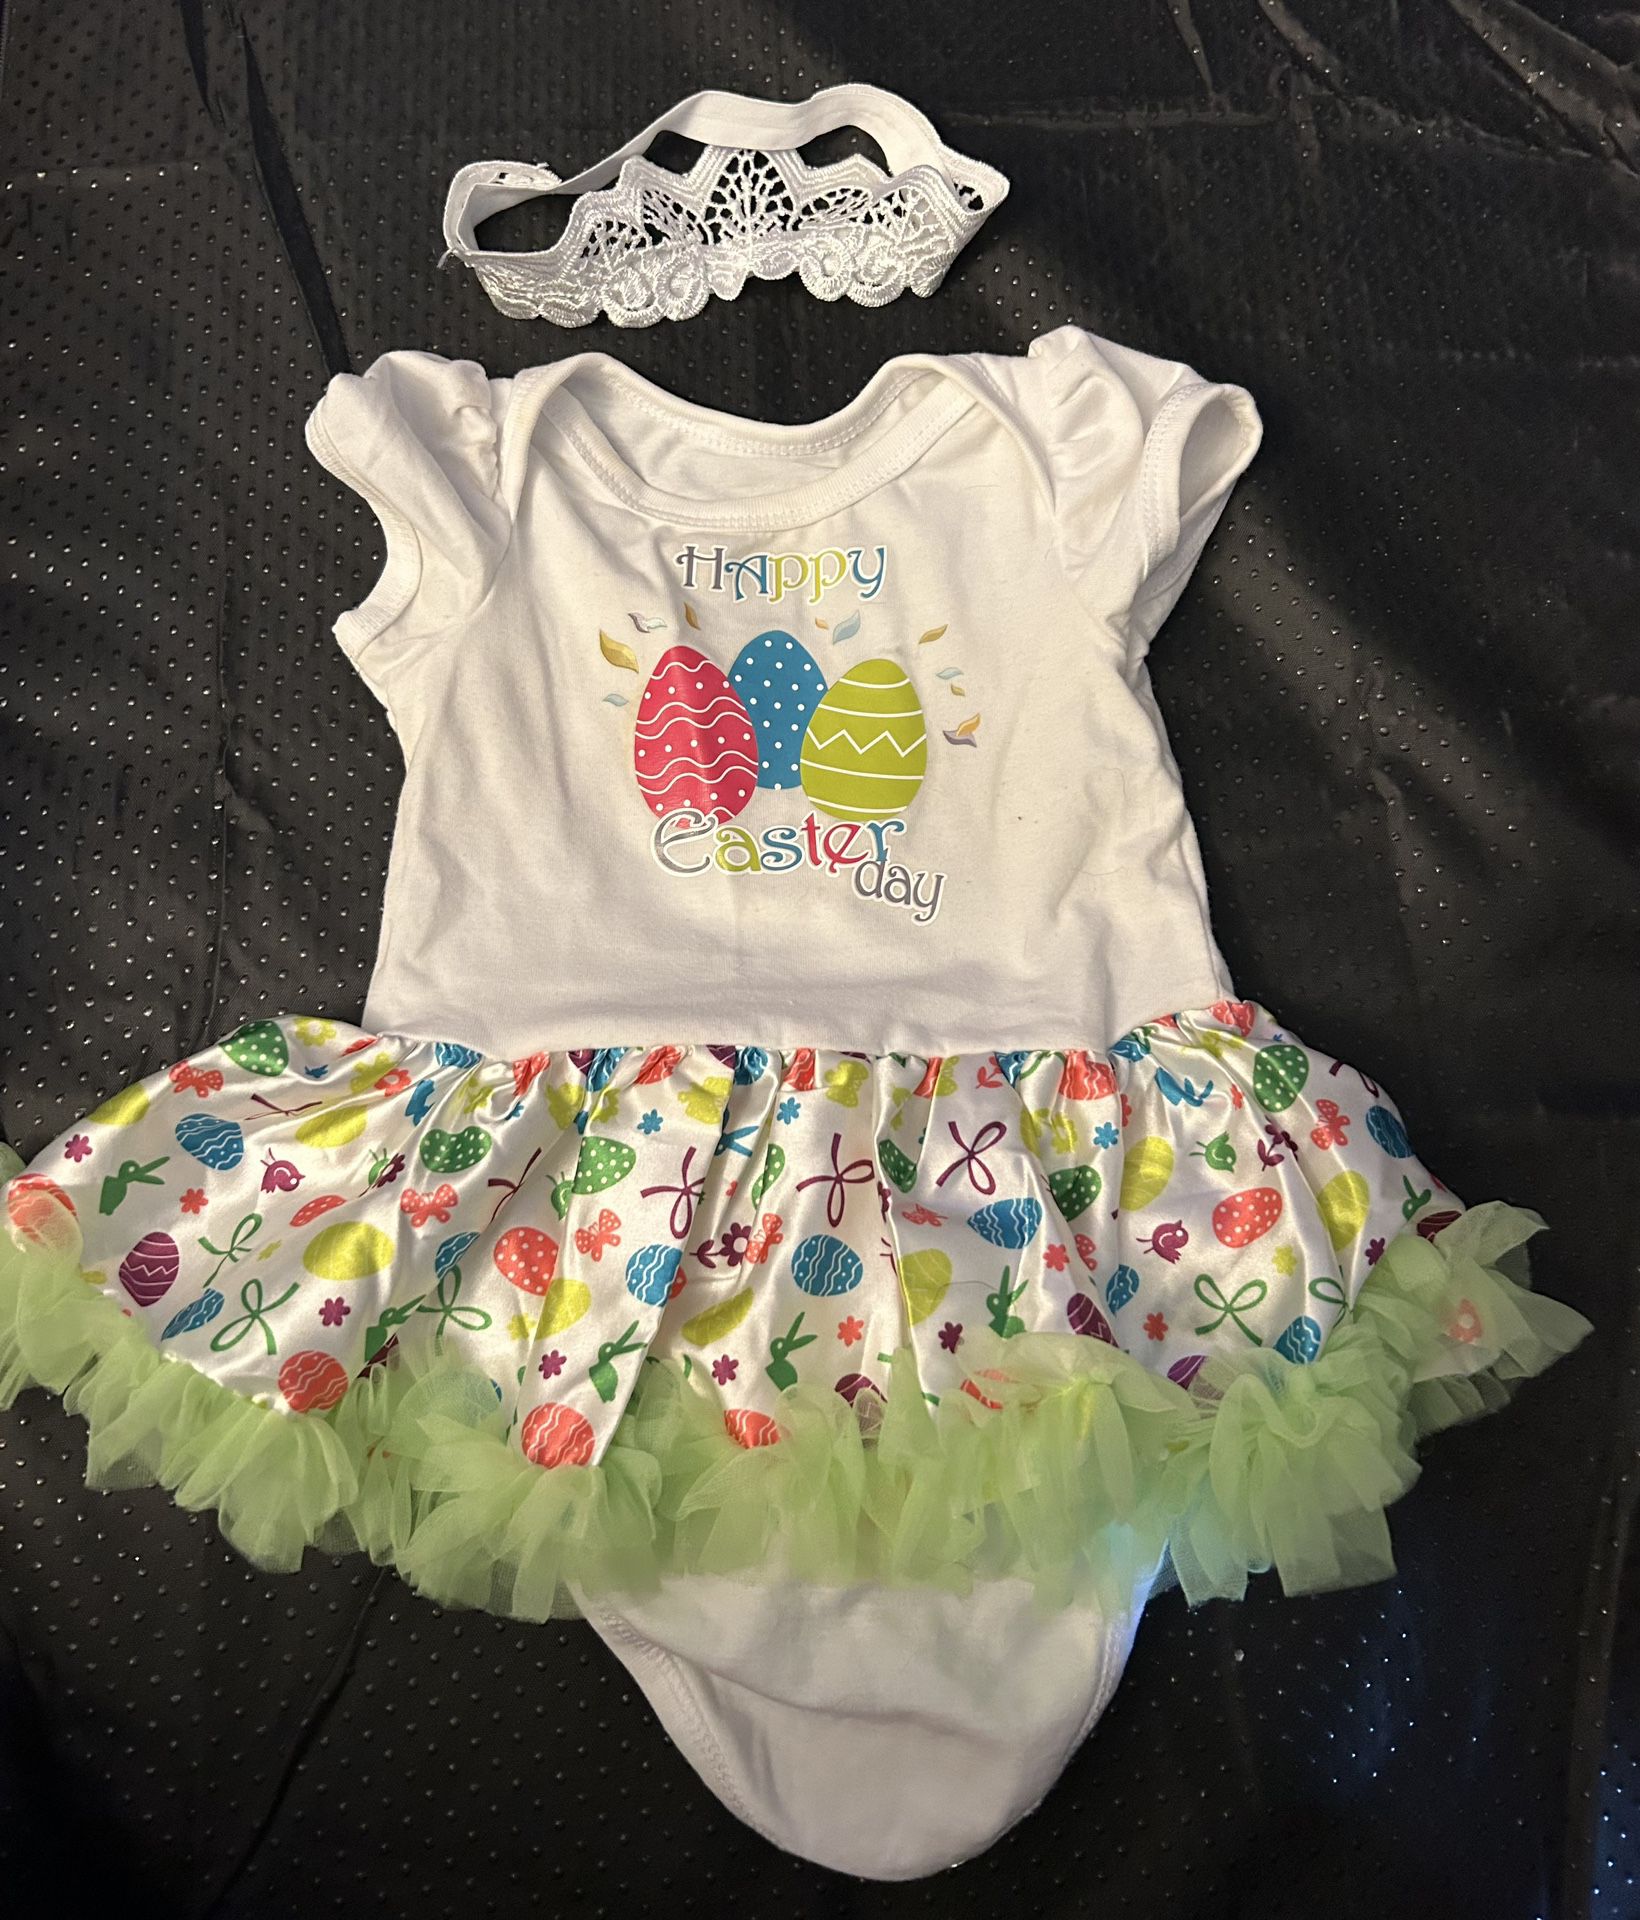 "Happy Easter Day" baby girl size 3-6 mos